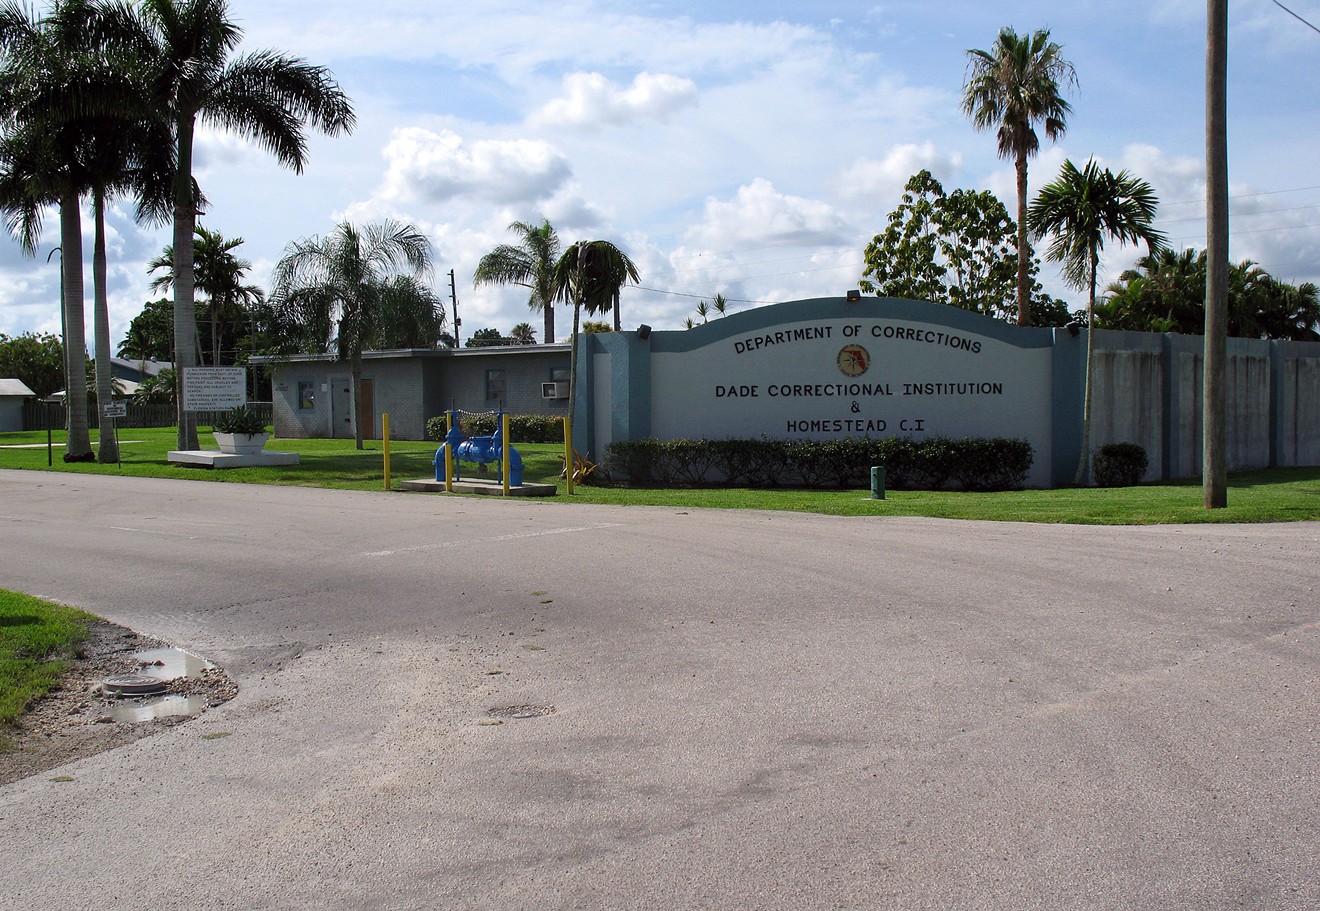 The Dade Correctional Institution in South Miami-Dade.